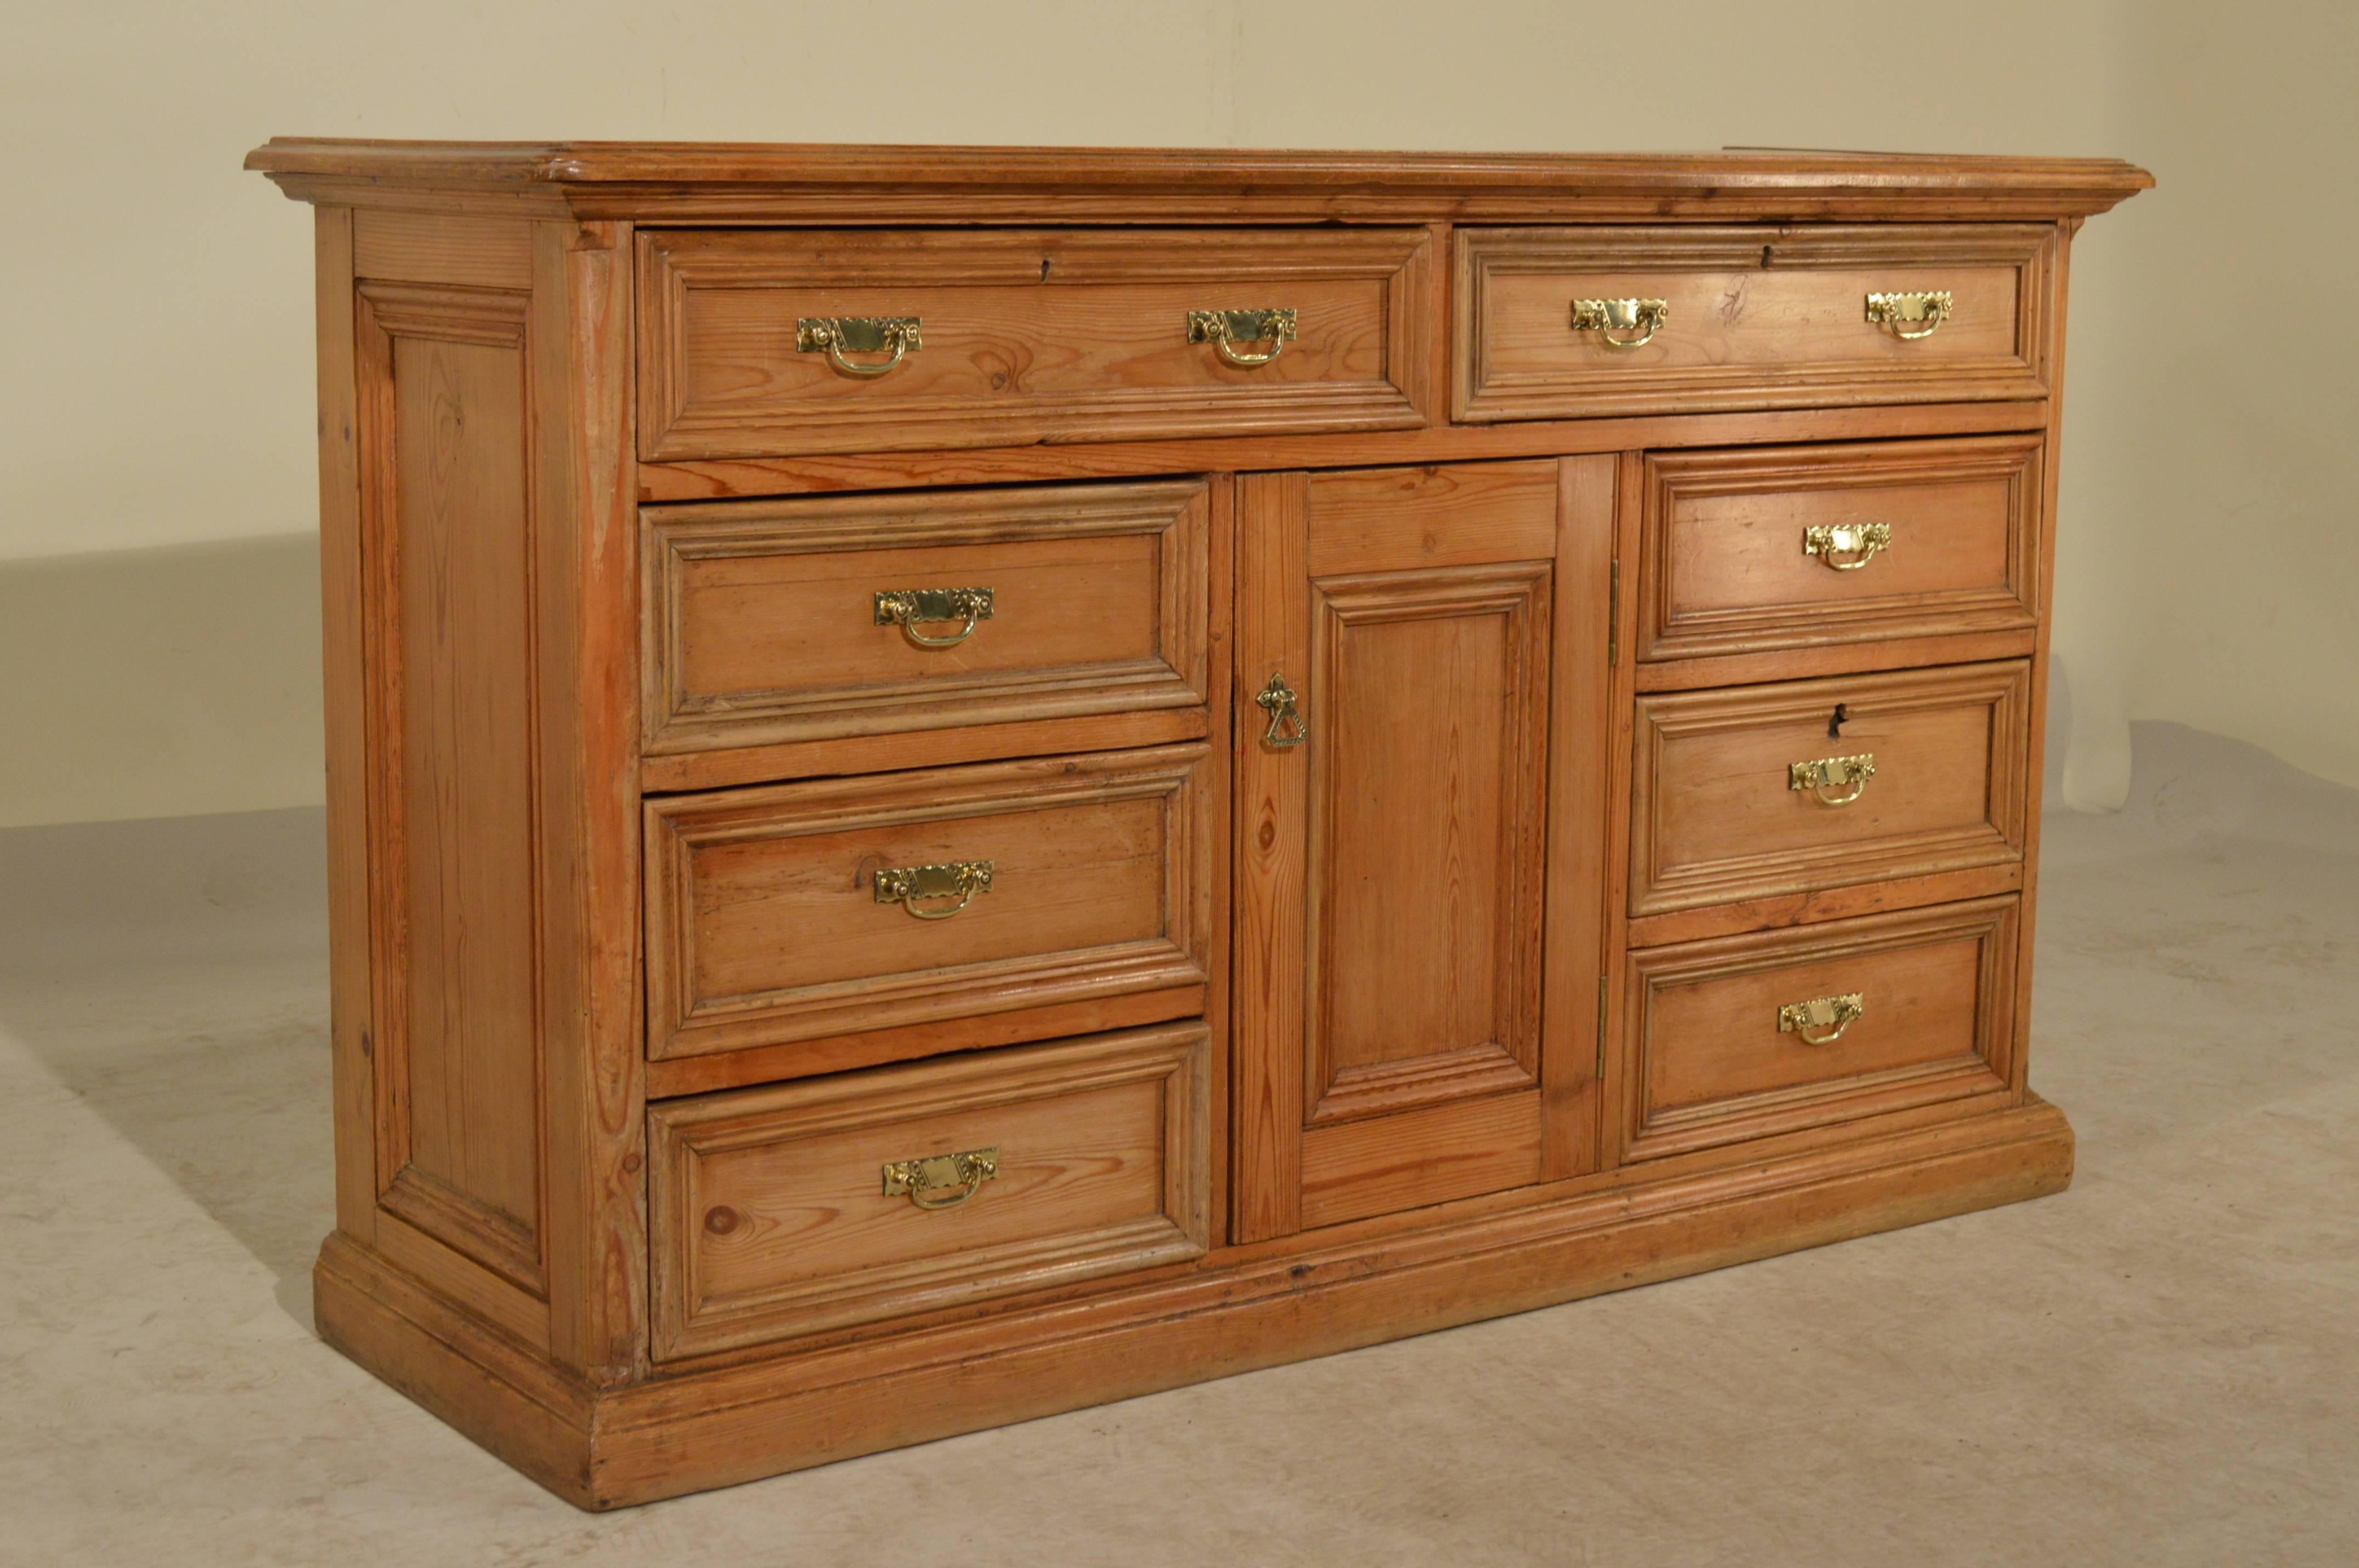 19th Century English dresser base made from pine with a beveled and molded edge around the top following down to raised paneled sides and two top drawers over a single door, flanked on each side by three drawers.  All of the drawers are wonderfully